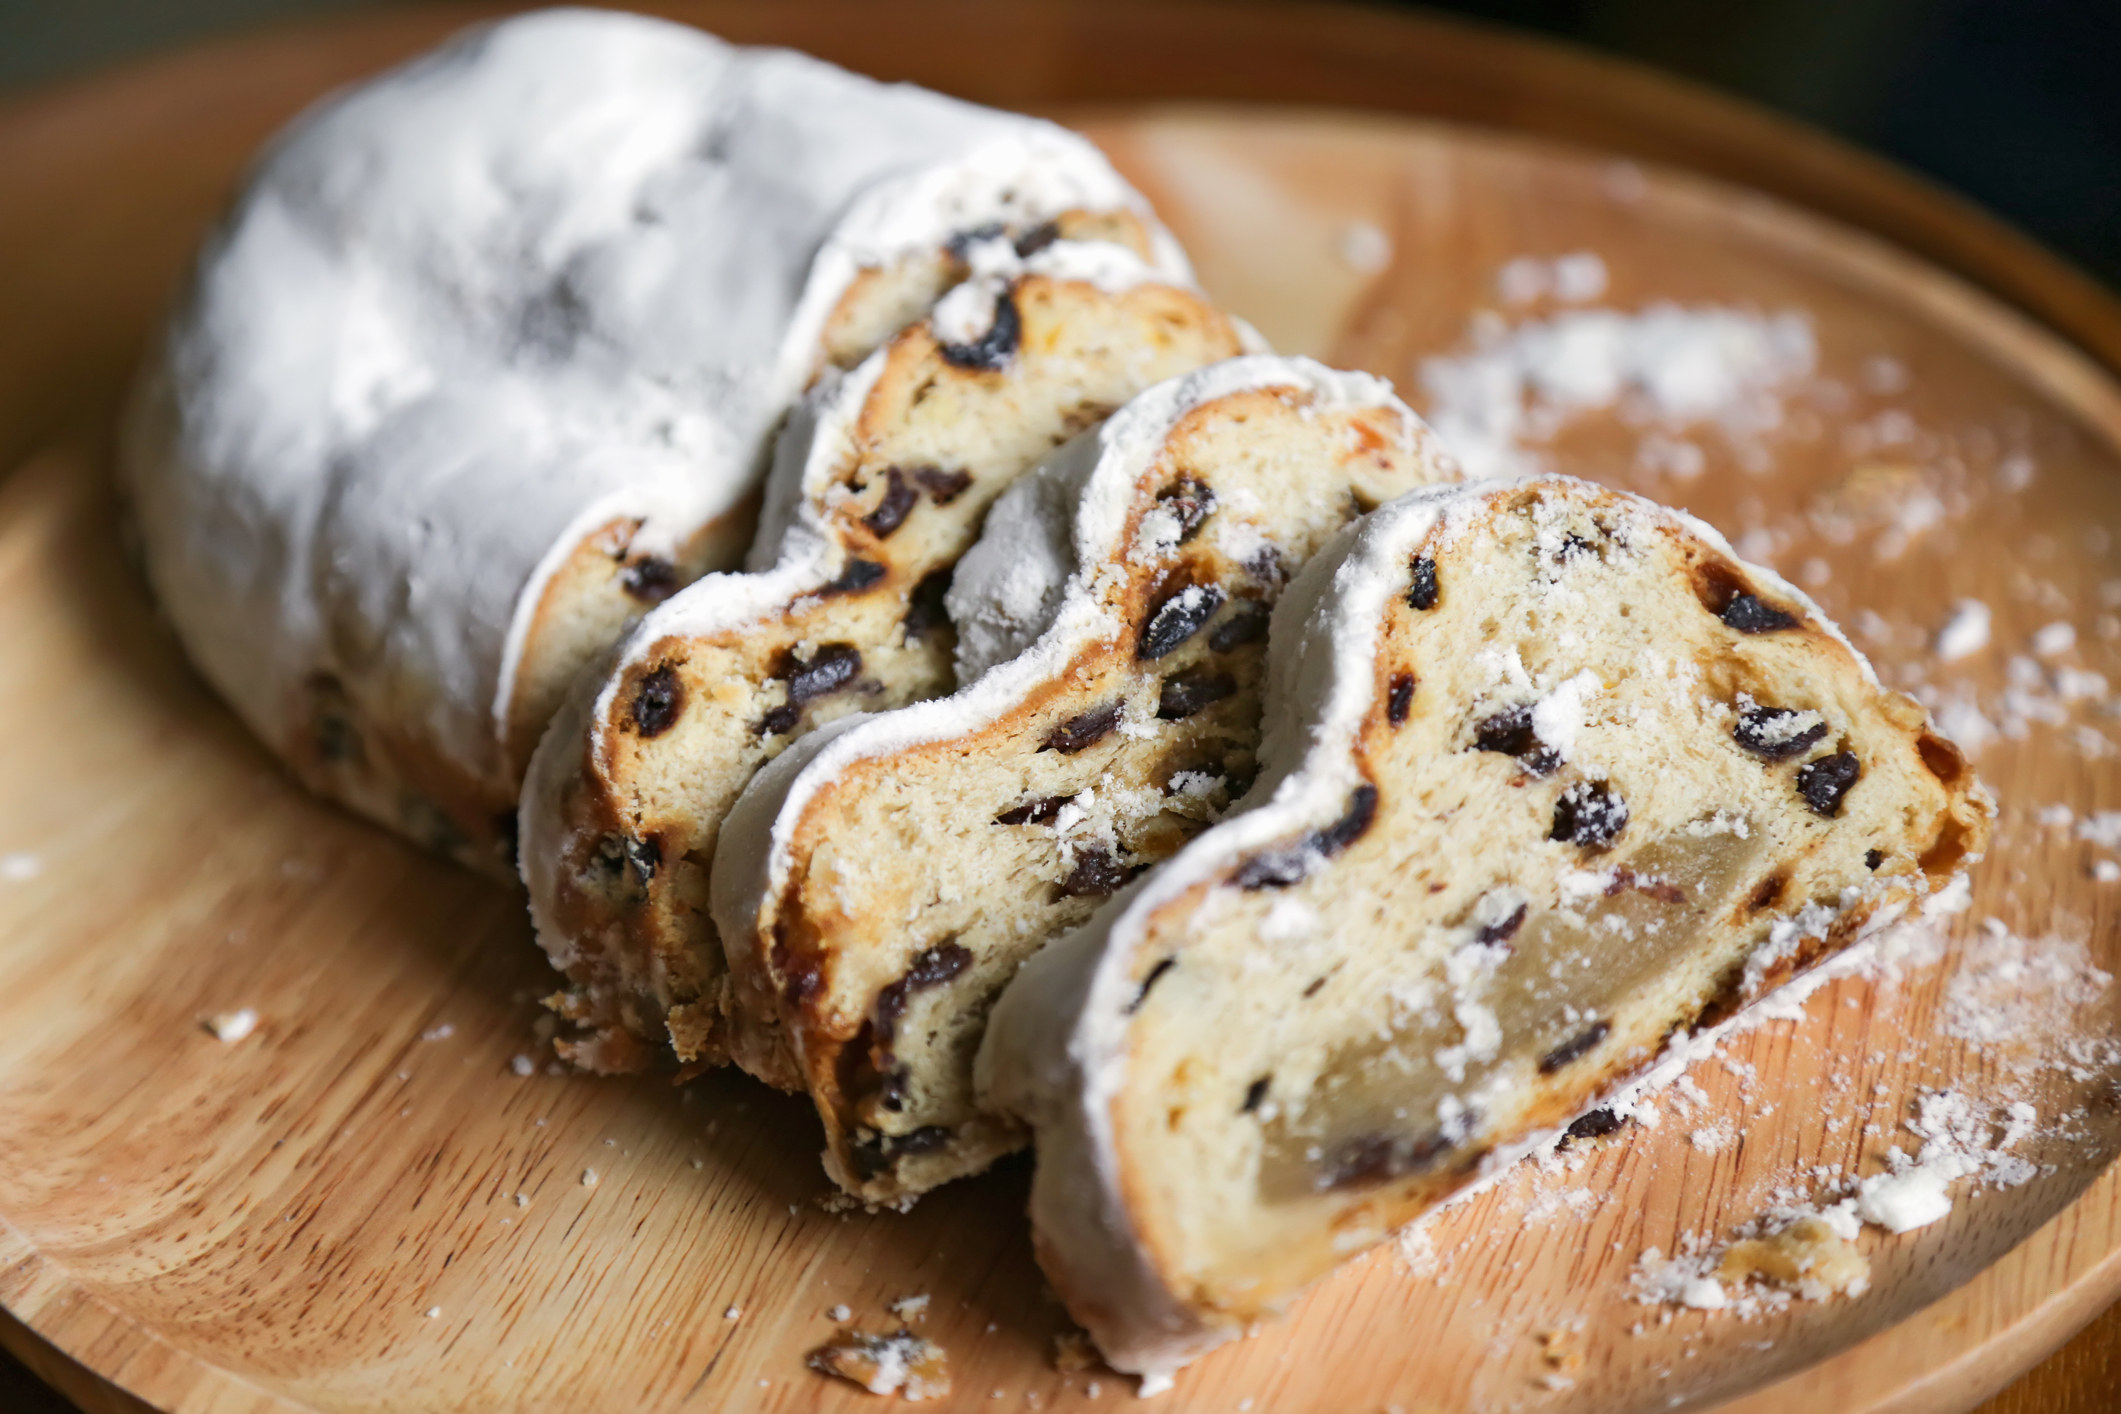 fruit bread of nuts, spices, and dried or candied fruit, coated with powdered sugar or icing sugar